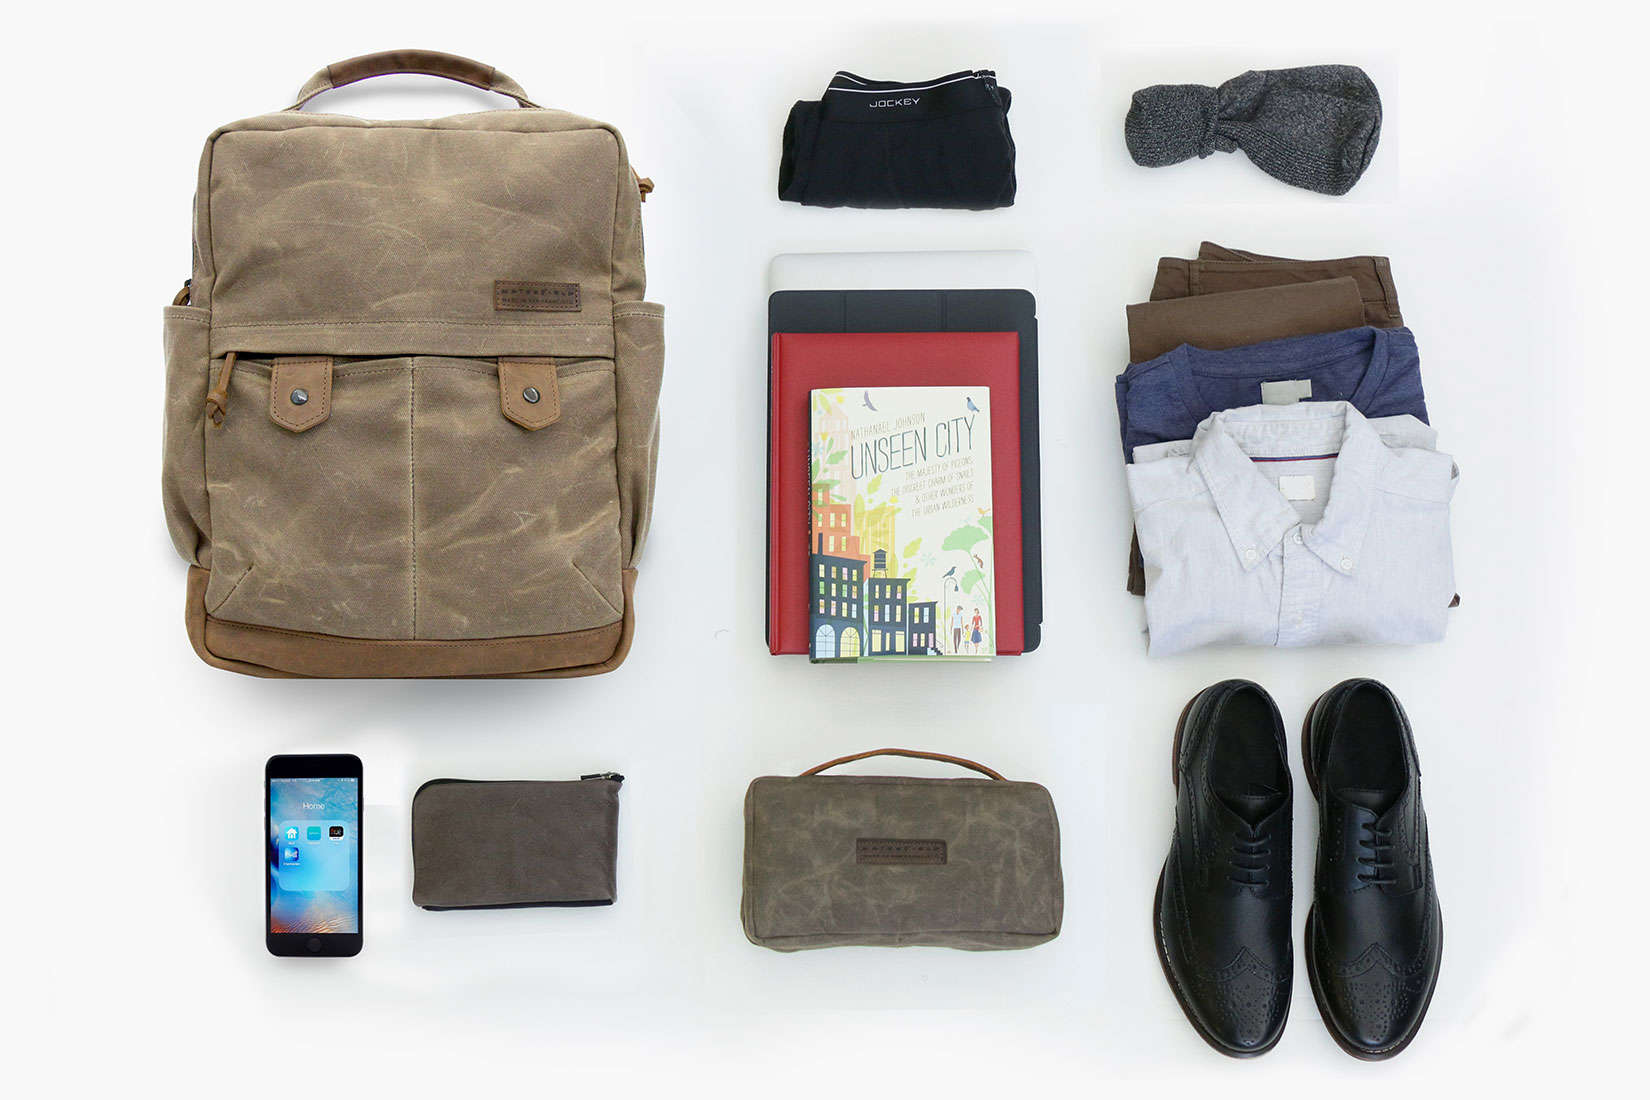 The Bolt laptop backpack gives a busy person the right stuff.